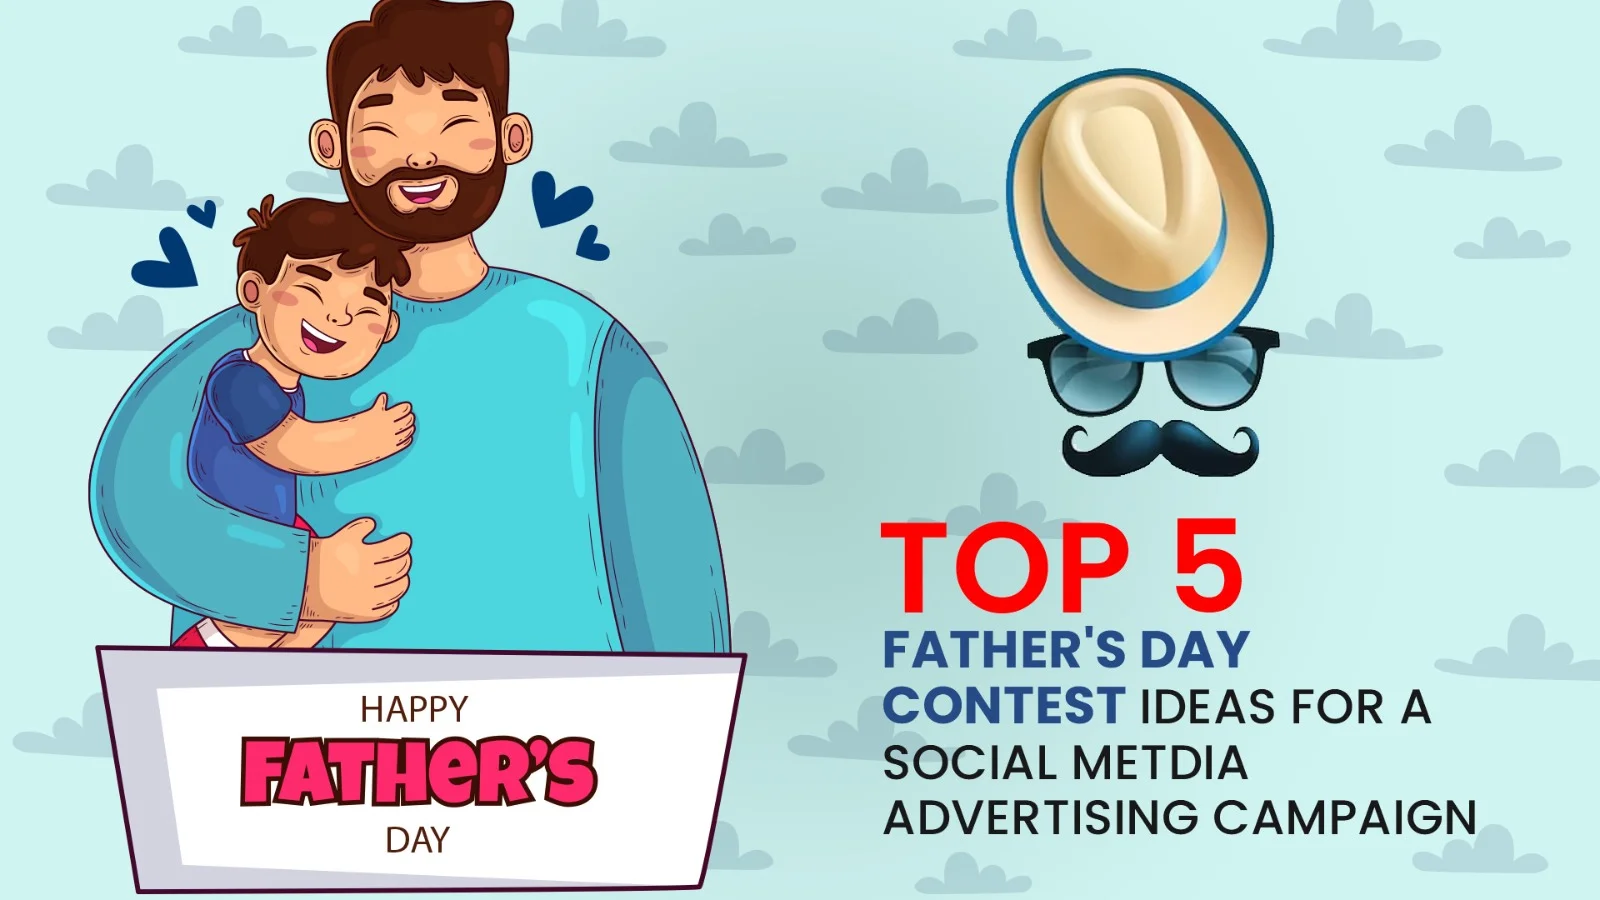 Top 5 Fathers Day contest ideas for a social media advertising campaign